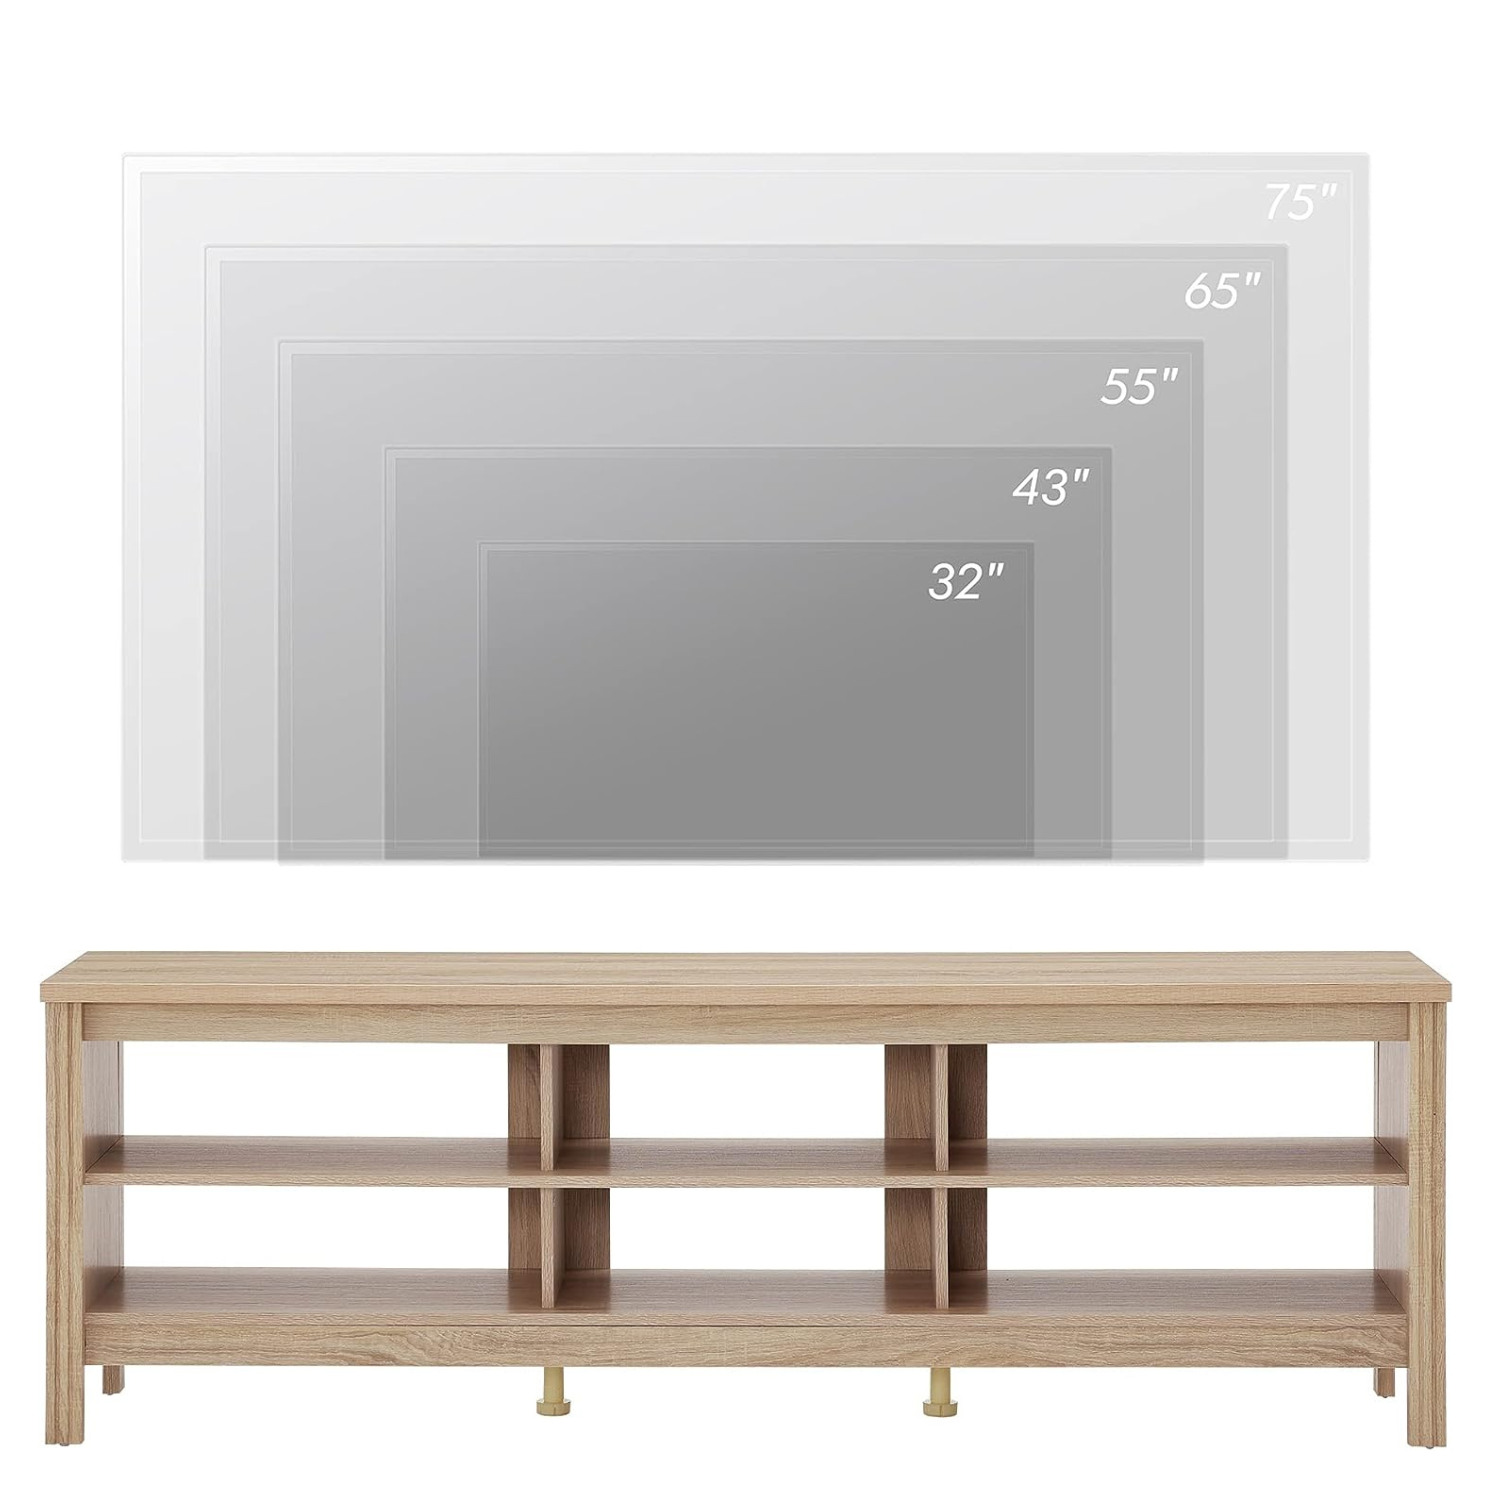 WAMPAT 70" TV Stand for 75 inch TV Entertainment Center, Wood TV Console Media Table for Living Room Bedroom, White Oak